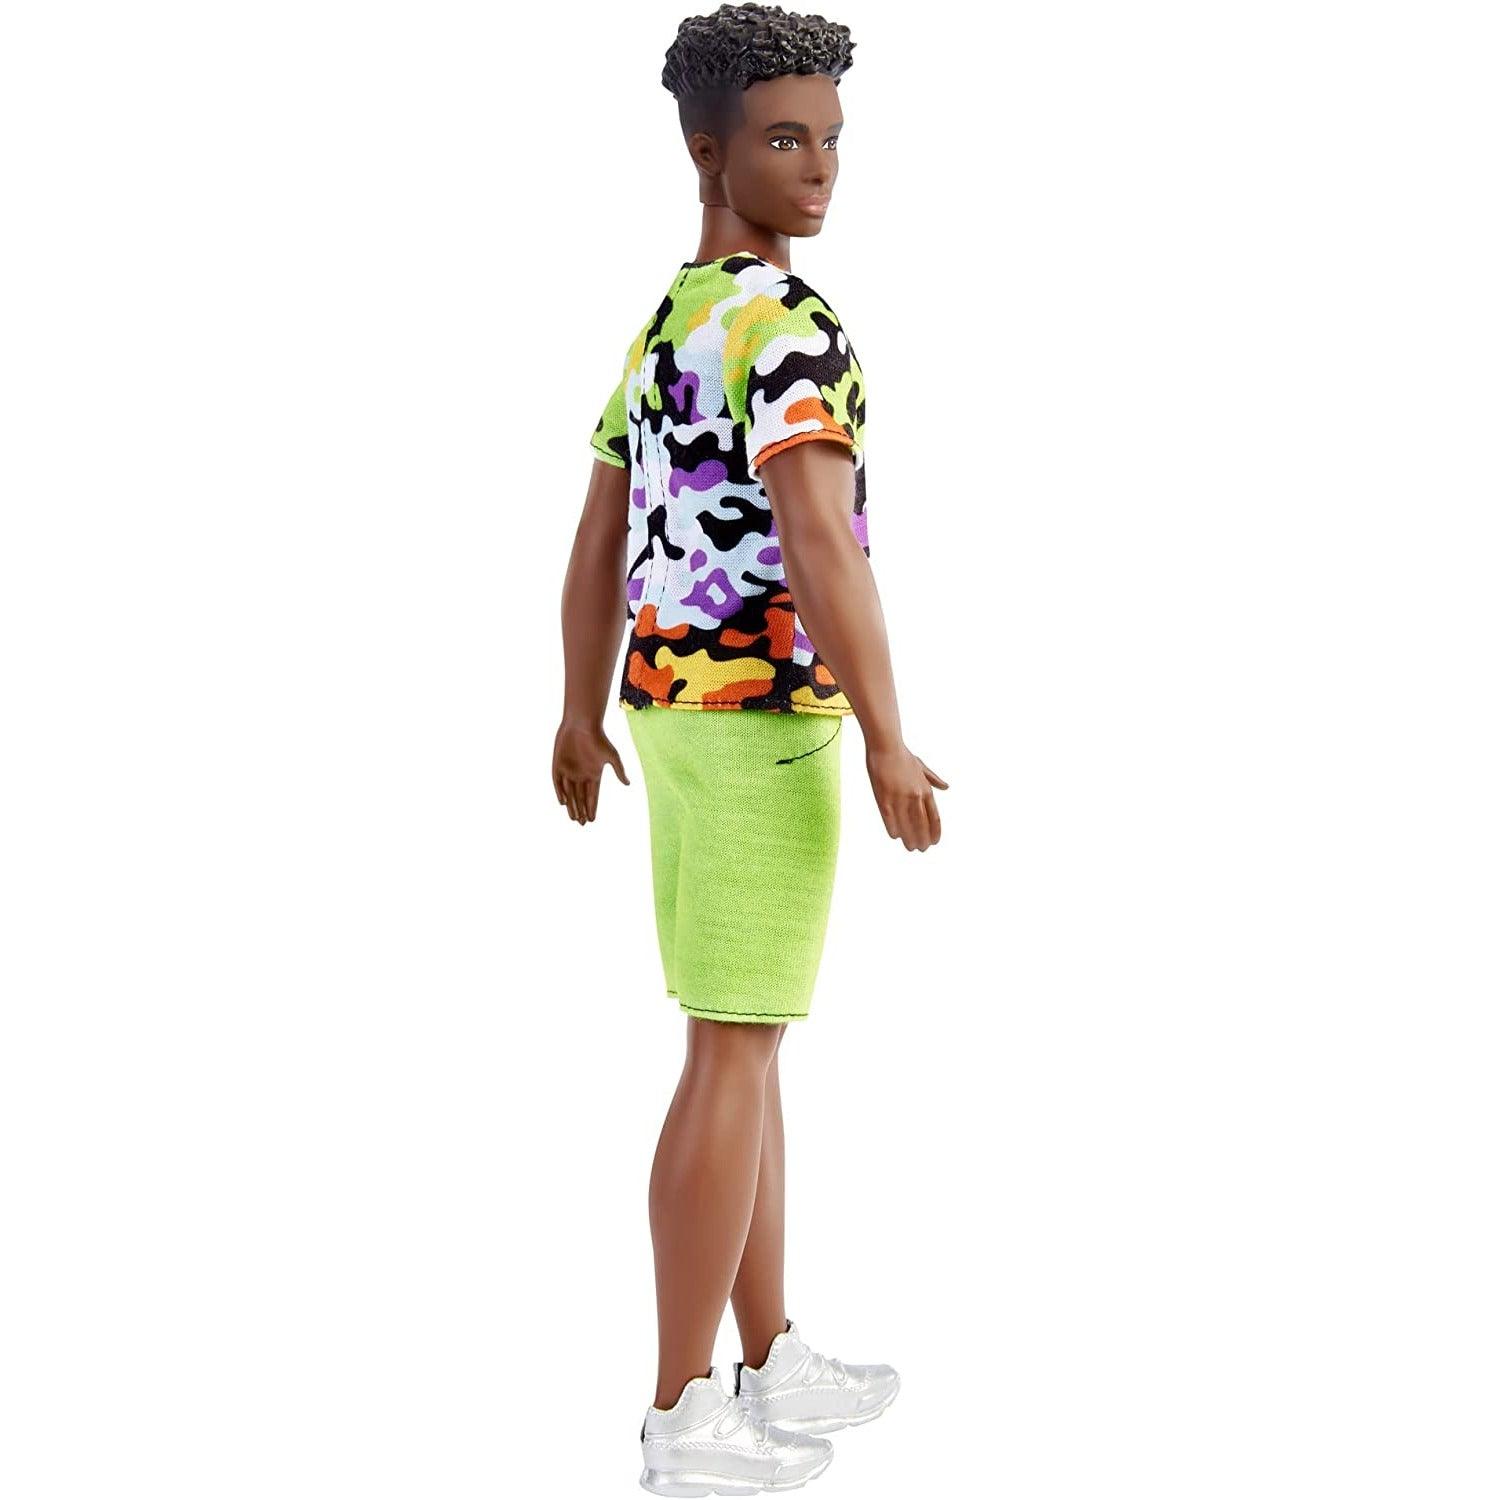 Barbie Ken Fashionistas Doll, Broad, Black Curly Hair, Multi-Colored Camo Print Shirt, Neon Green Shorts, Silvery Sneakers - BumbleToys - 3-8 Years, 5-7 Years, Barbie, Boys, collectible, collectors, Fashion Dolls & Accessories, Girls, Pre-Order